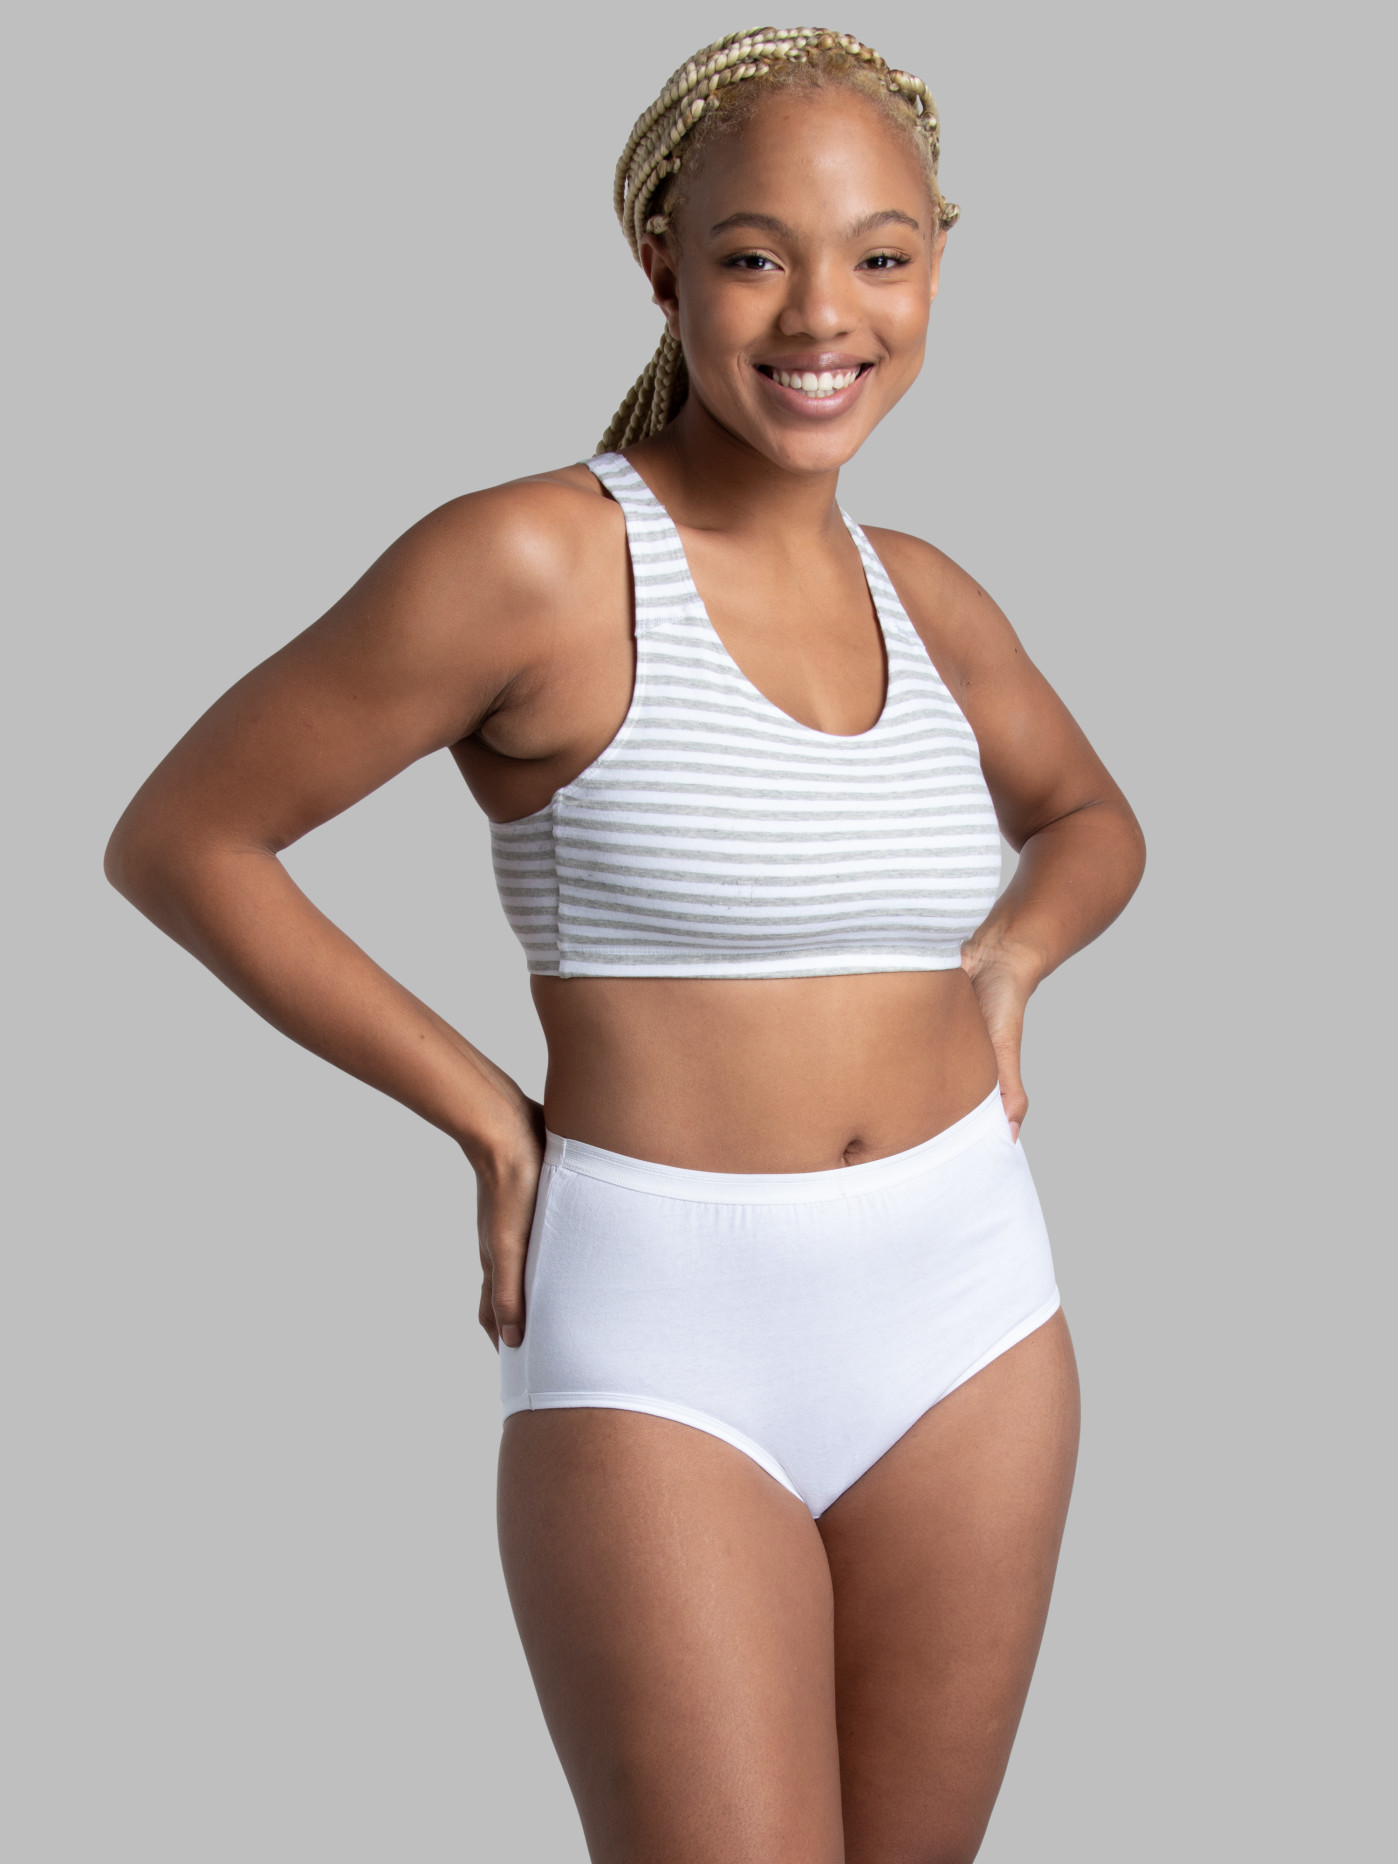 Fruit of The Loom XL Tag-Free Full Cut Cotton Briefs Underwear 6 Pack White  NEW 885306959135